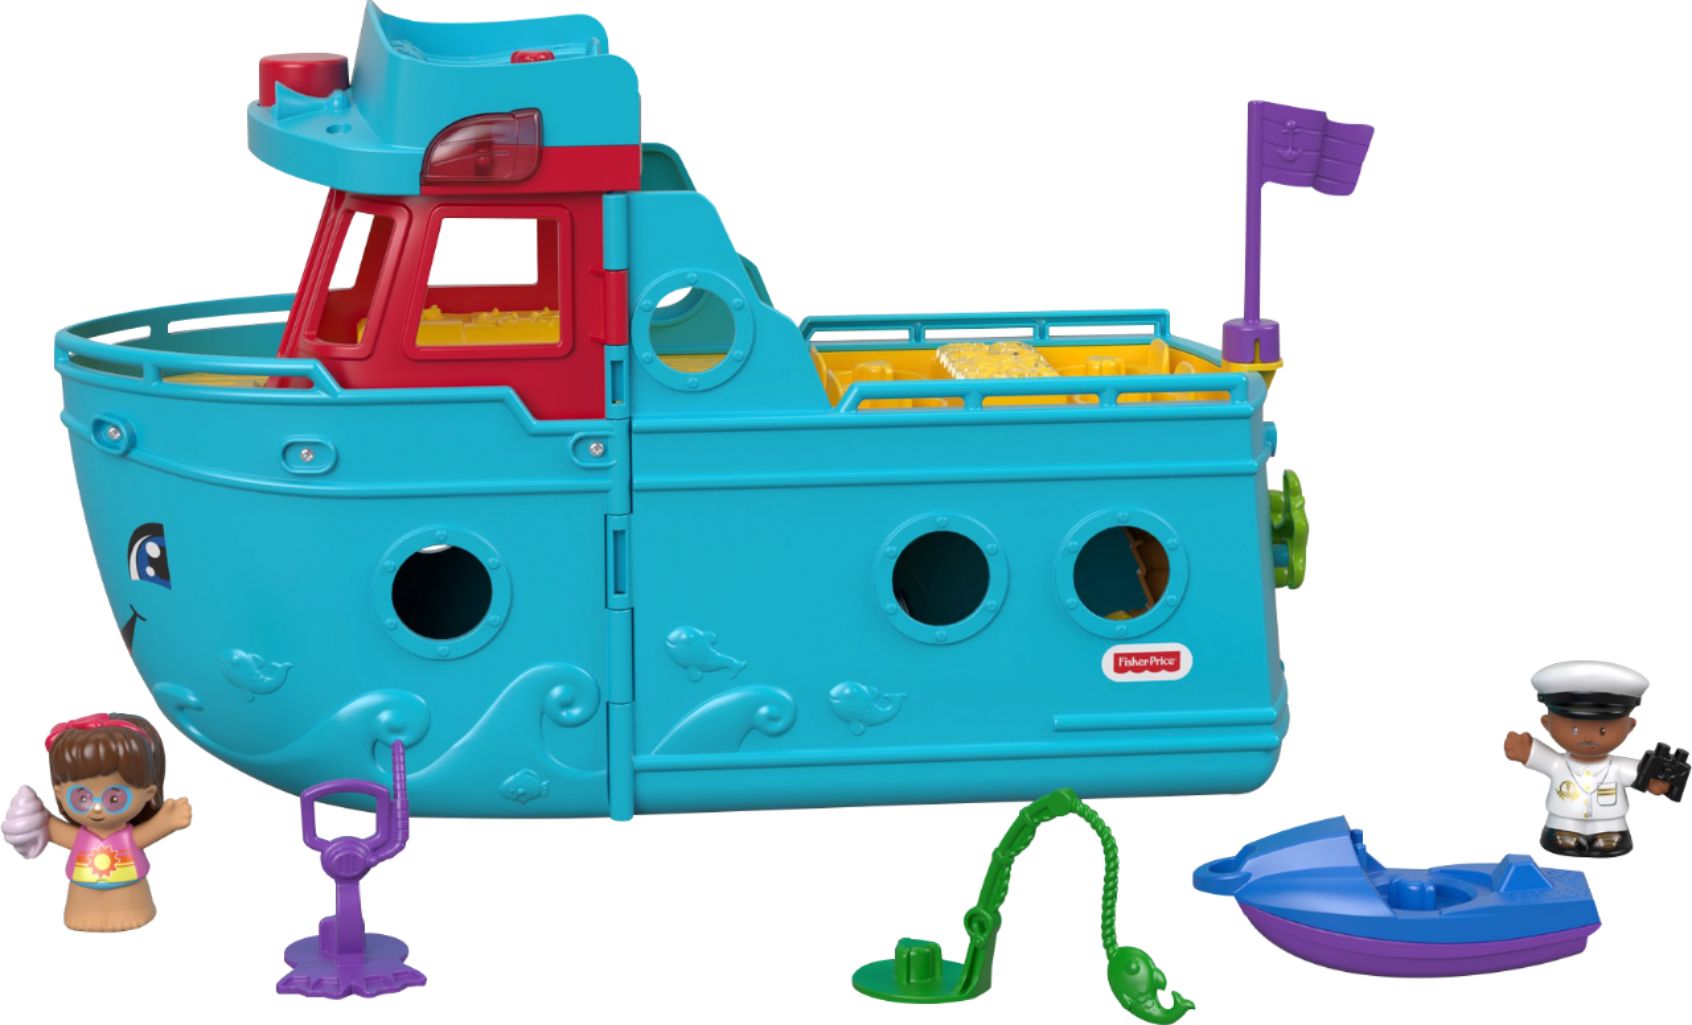 fisher price little people boat